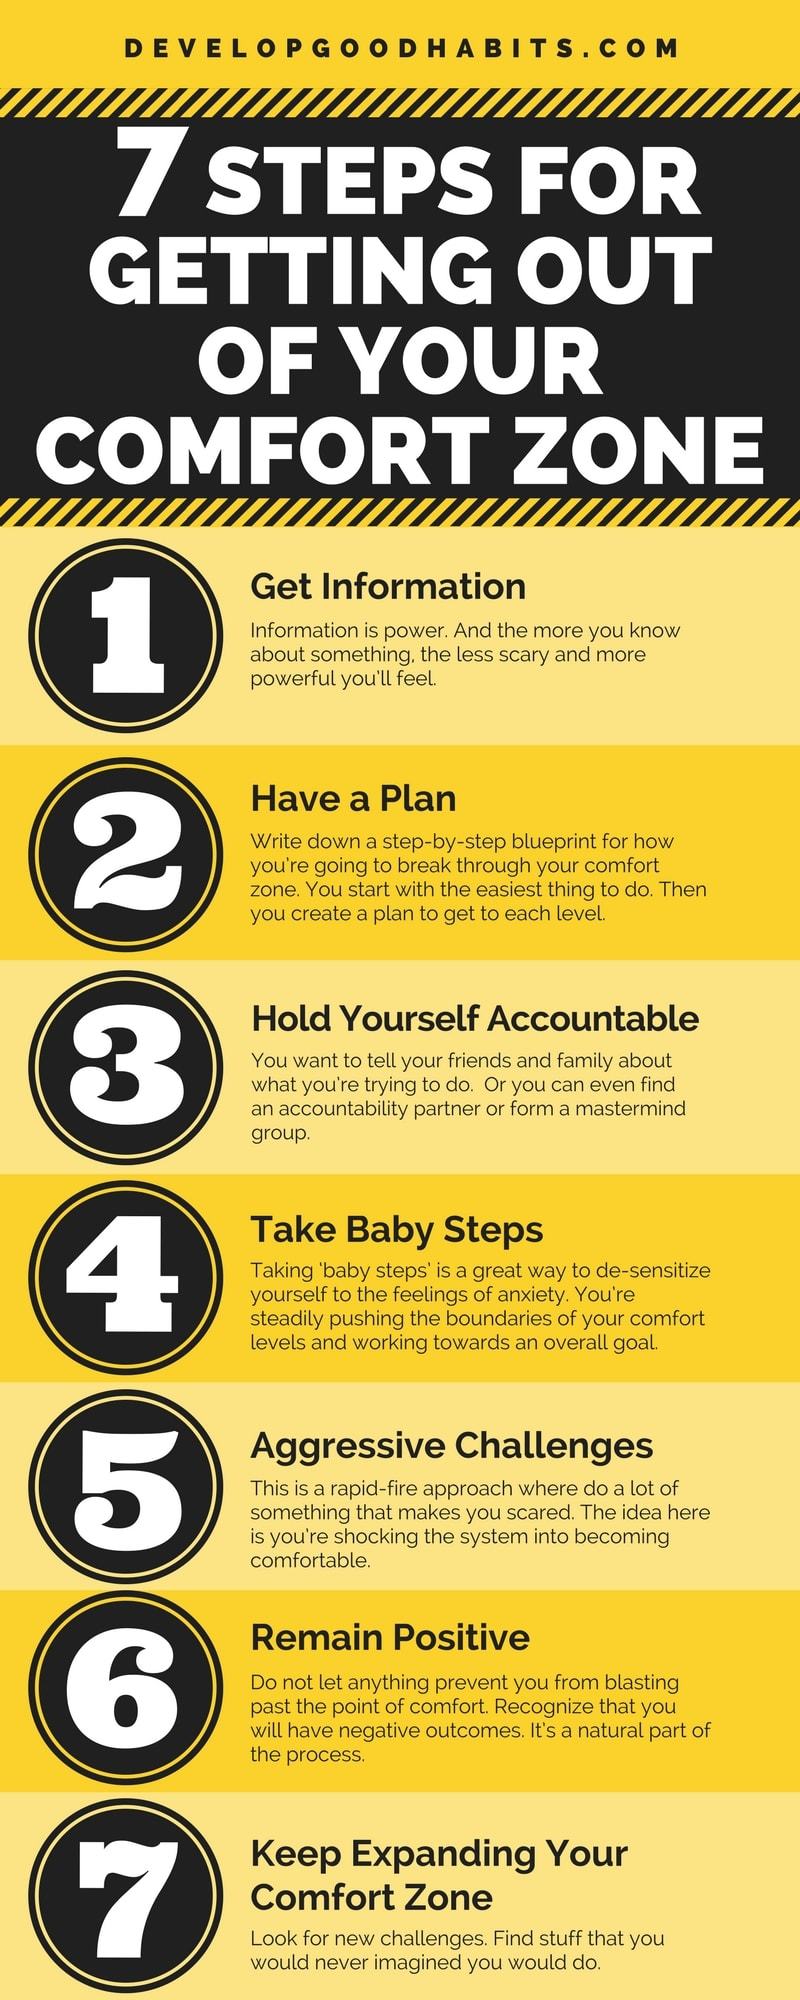 Use these seven steps to get out of your comfort zone and push self-created boundaries of what you think is possible. #infographic #stress #anxiety #habits #change #success #personaldevelopment #personalgrowth